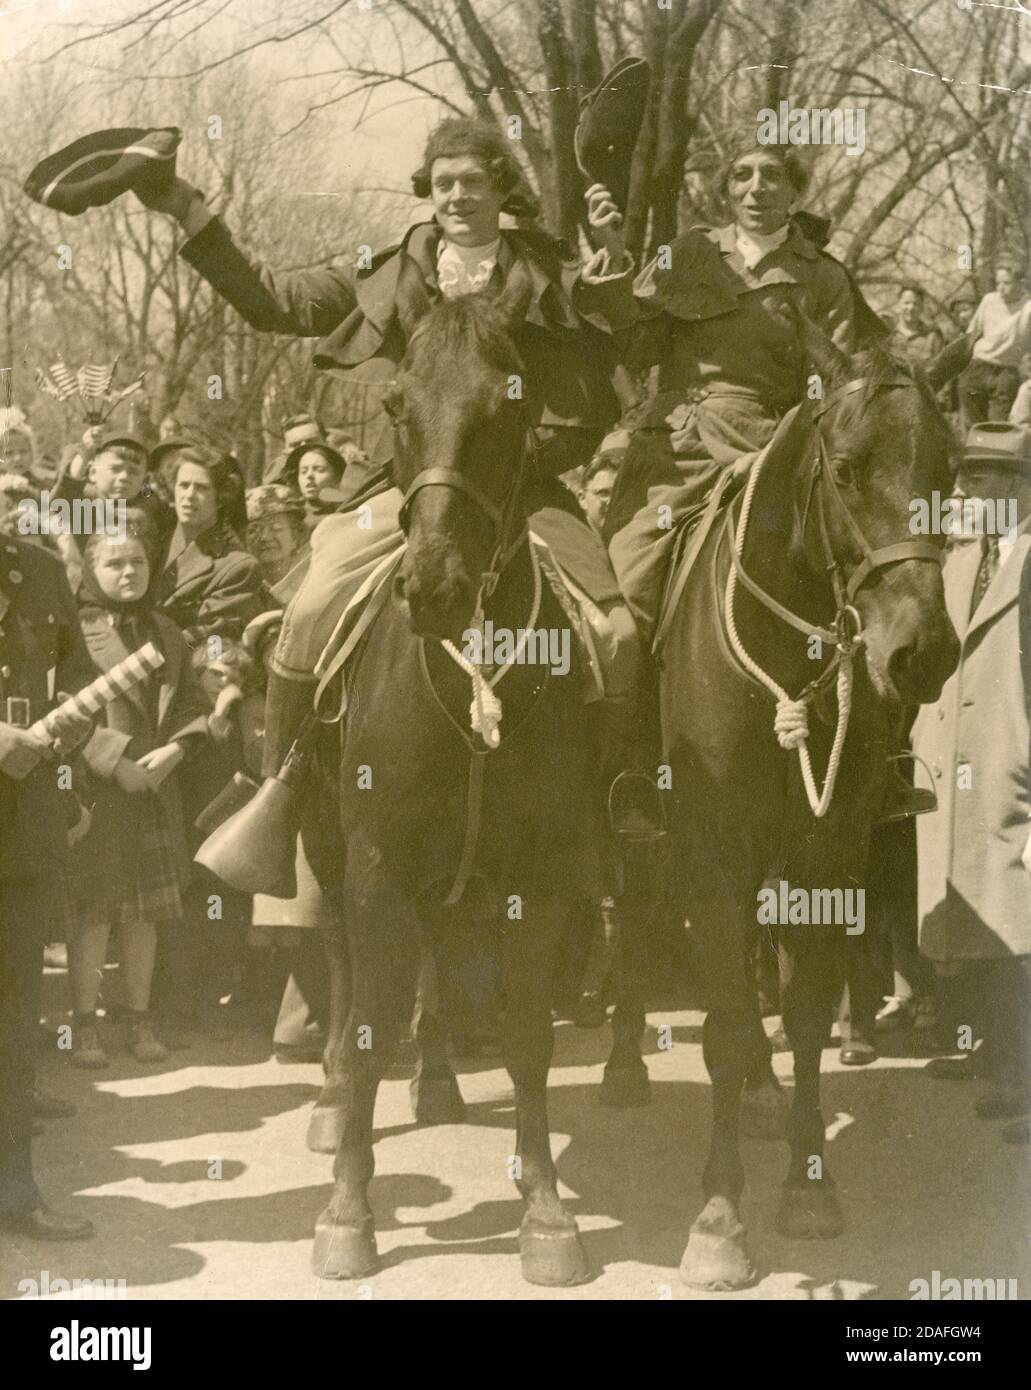 Antique c1935 photograph, actors portraying Paul Revere and William Dawes on horseback. Exact location unknown, possibly Lexington or Concord, Massachusetts on Patriots Day (April 19). SOURCE: ORIGINAL PHOTOGRAPH Stock Photo